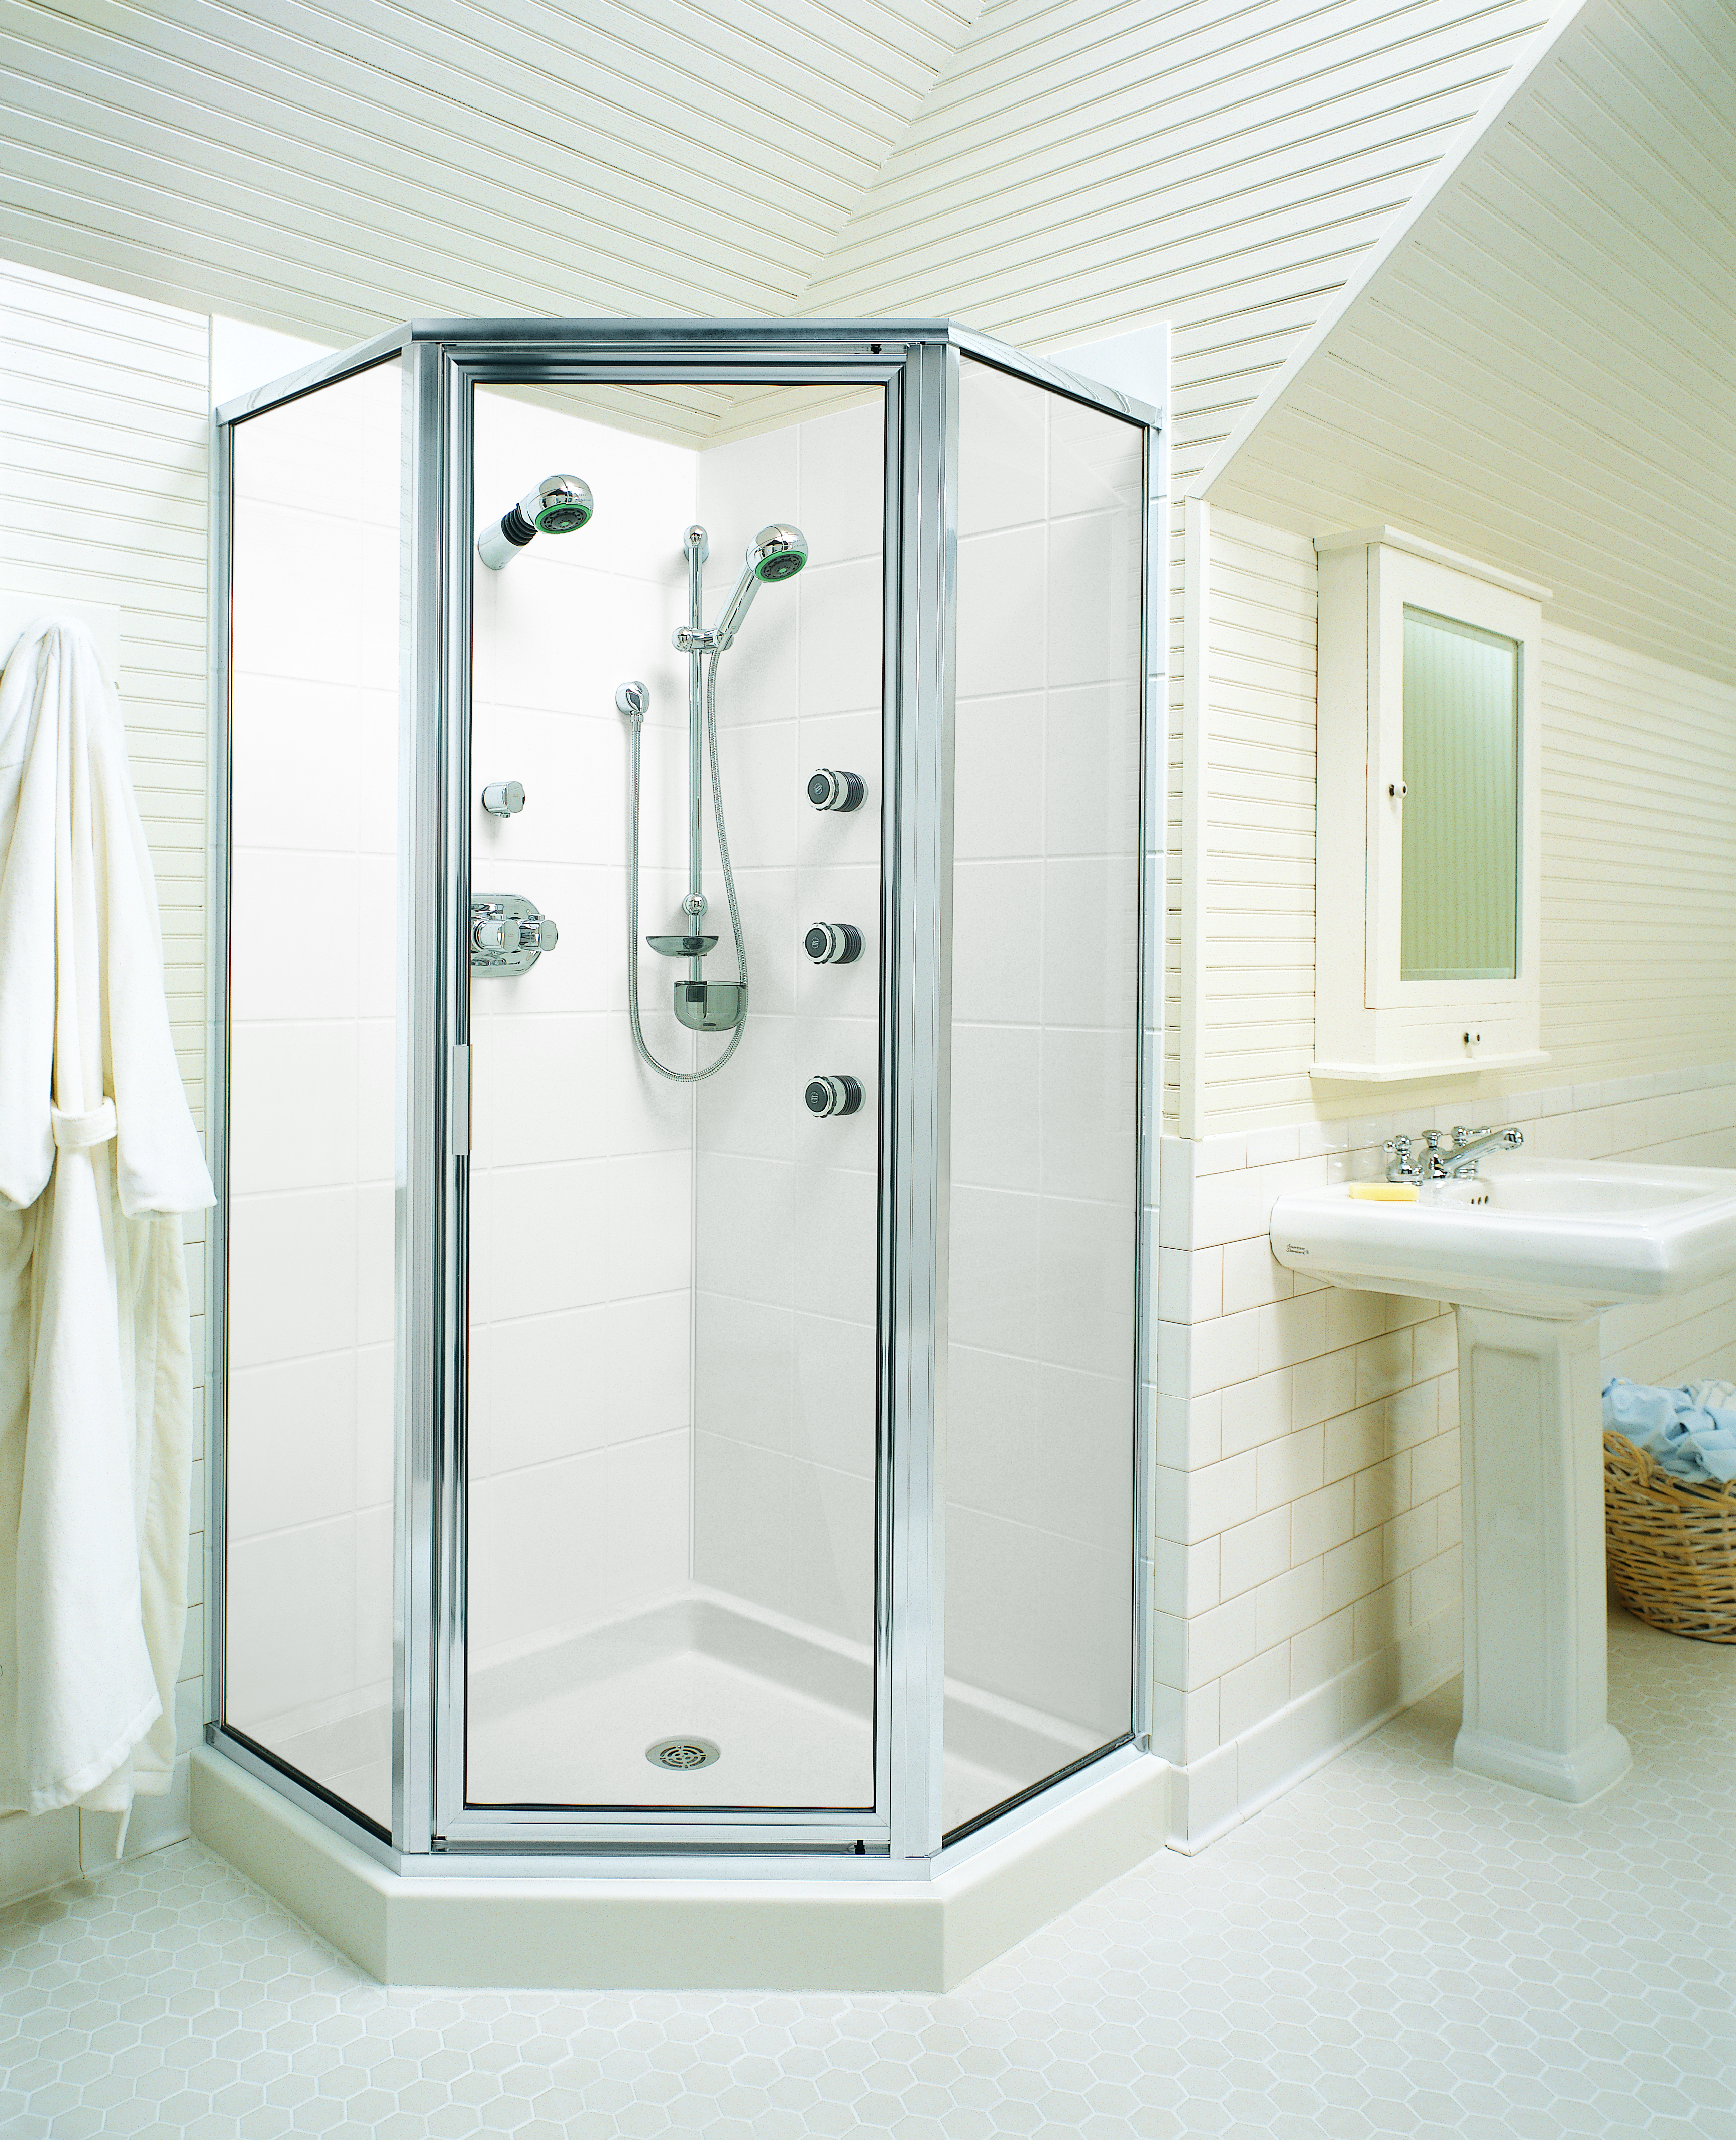 Town Square 38 Inch by 38 Inch Neo Angle Shower Base